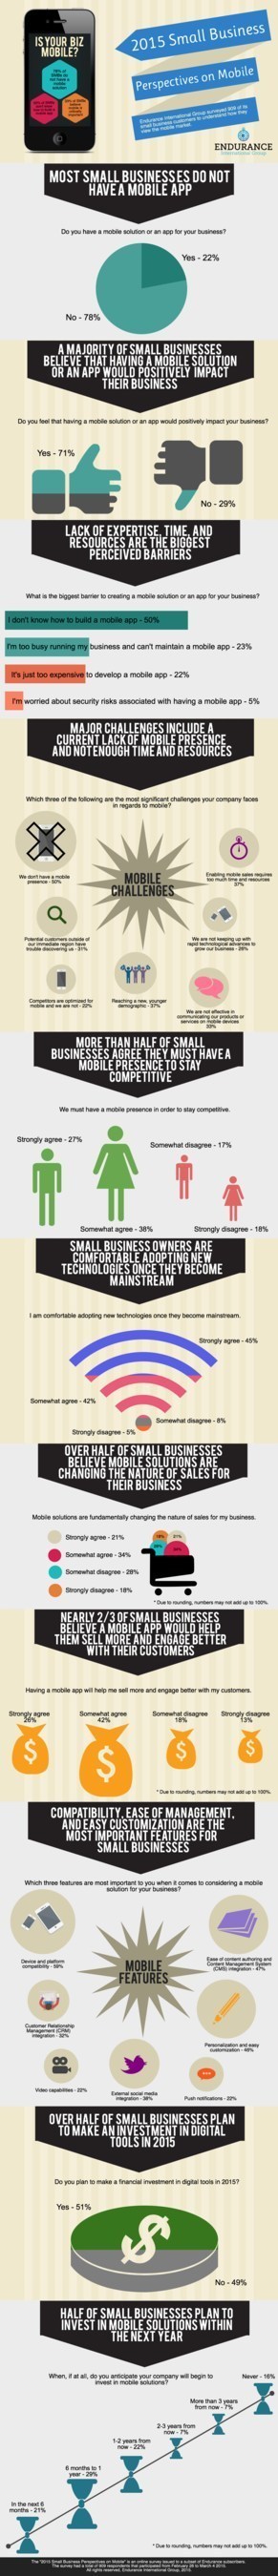 2015 Small Business Perspectives on Mobile Infographic